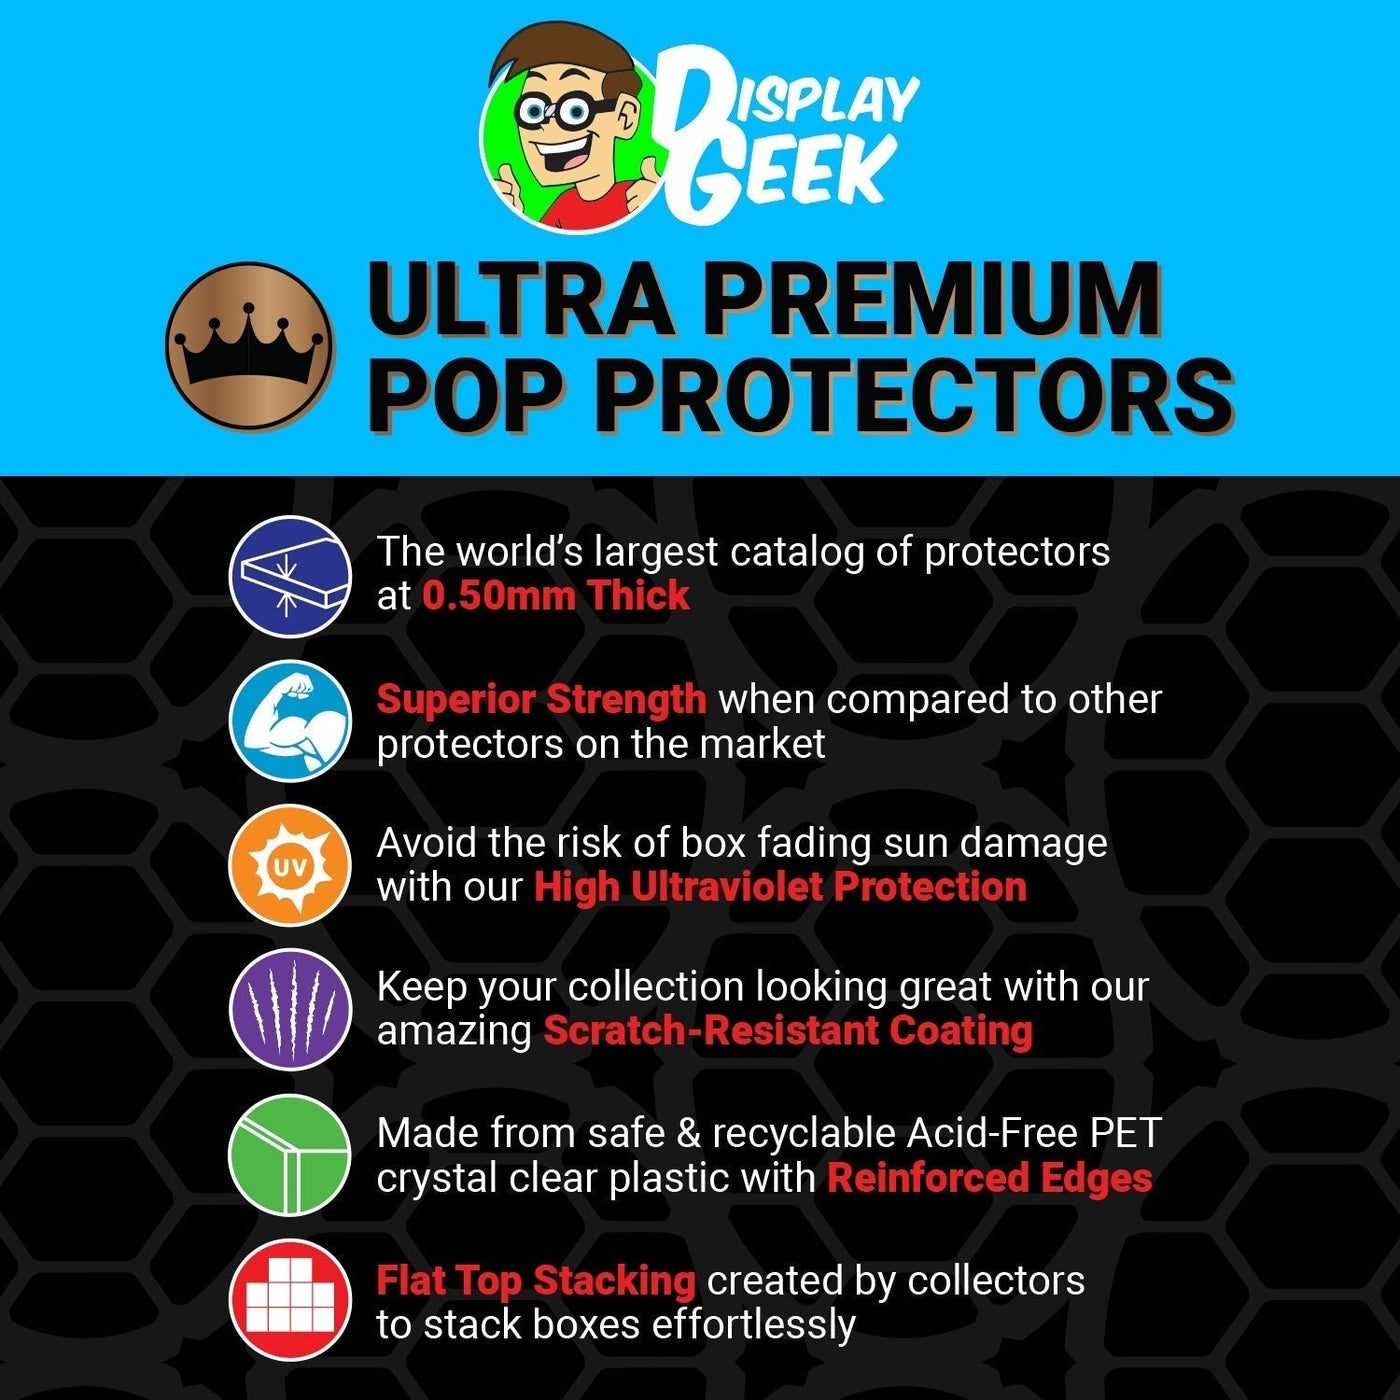 Pop Protector for 6 inch Giant Lady Cream #99 Super Funko Pop on The Protector Guide App by Display Geek